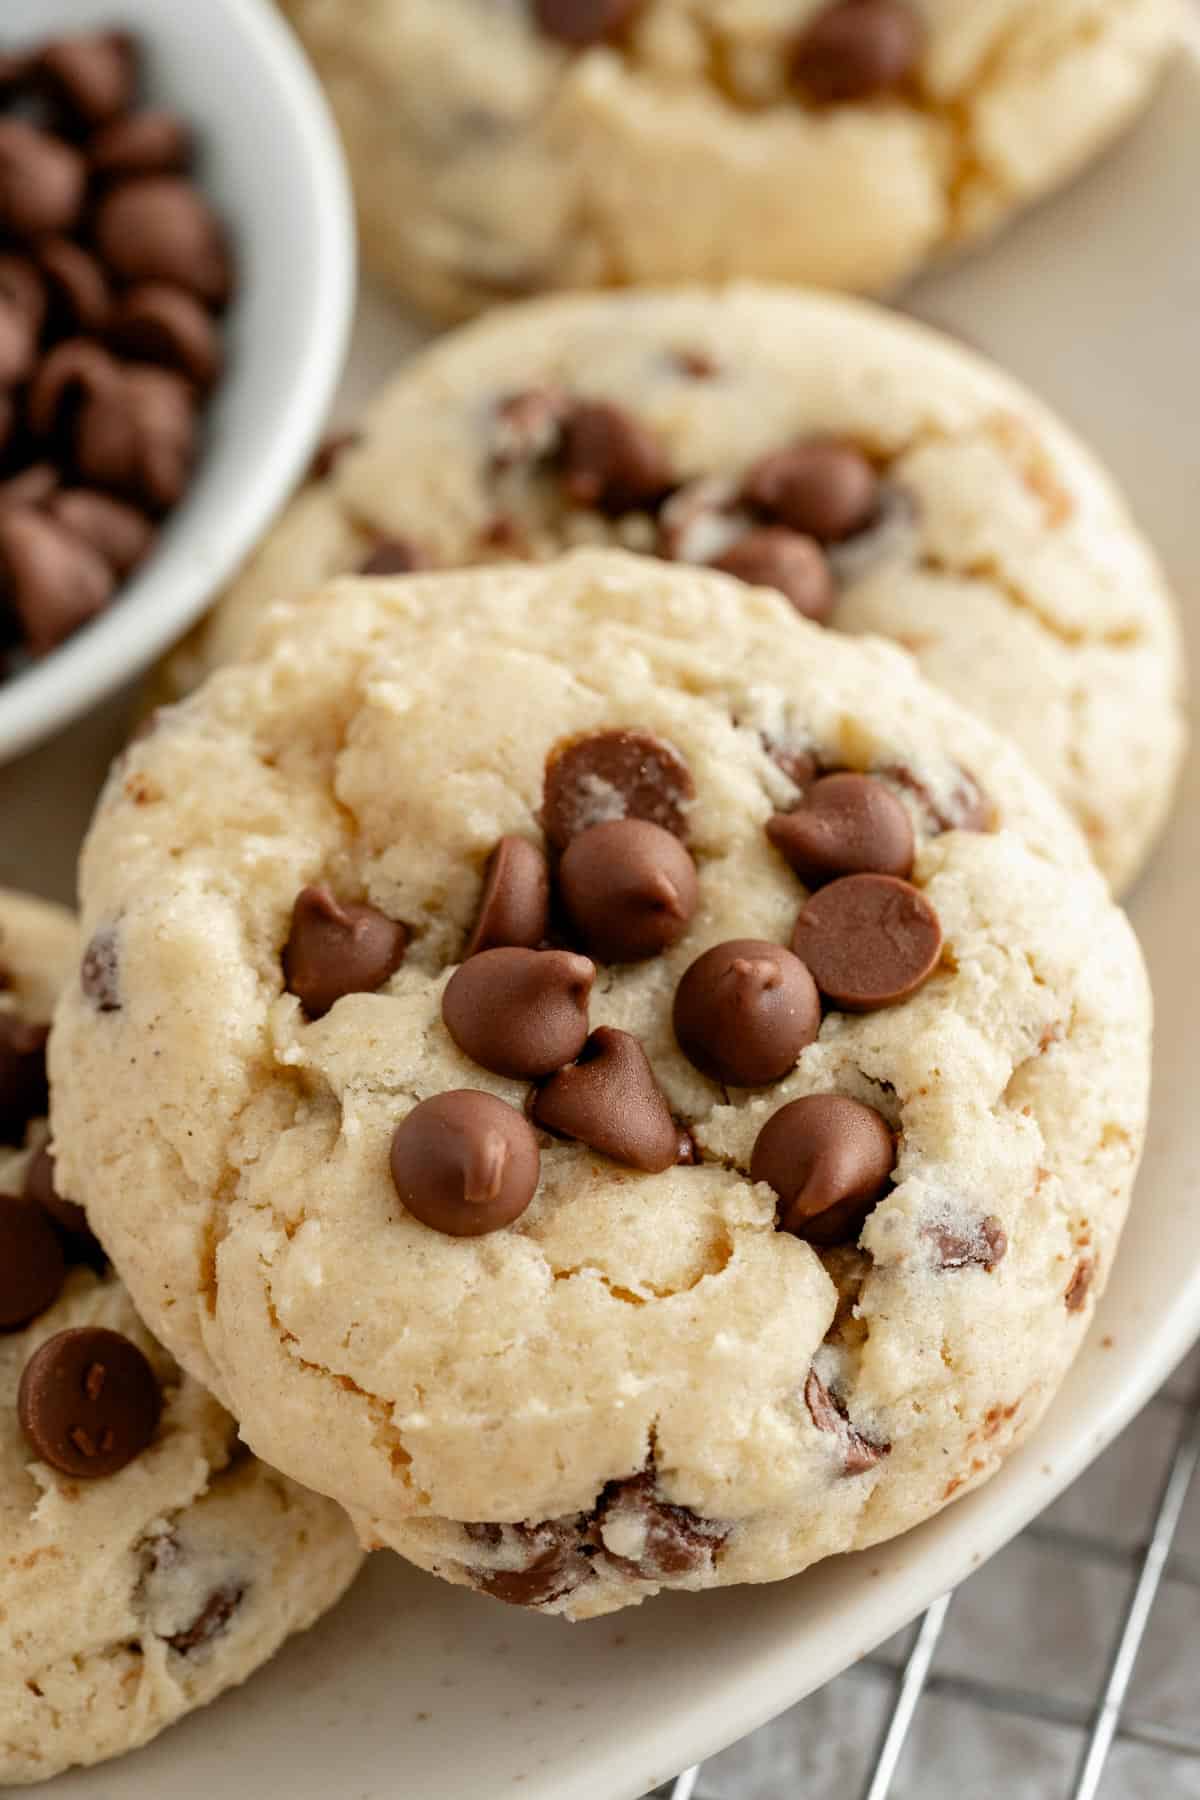 thesechocolate chip cookies are perfect and made without brown sugar